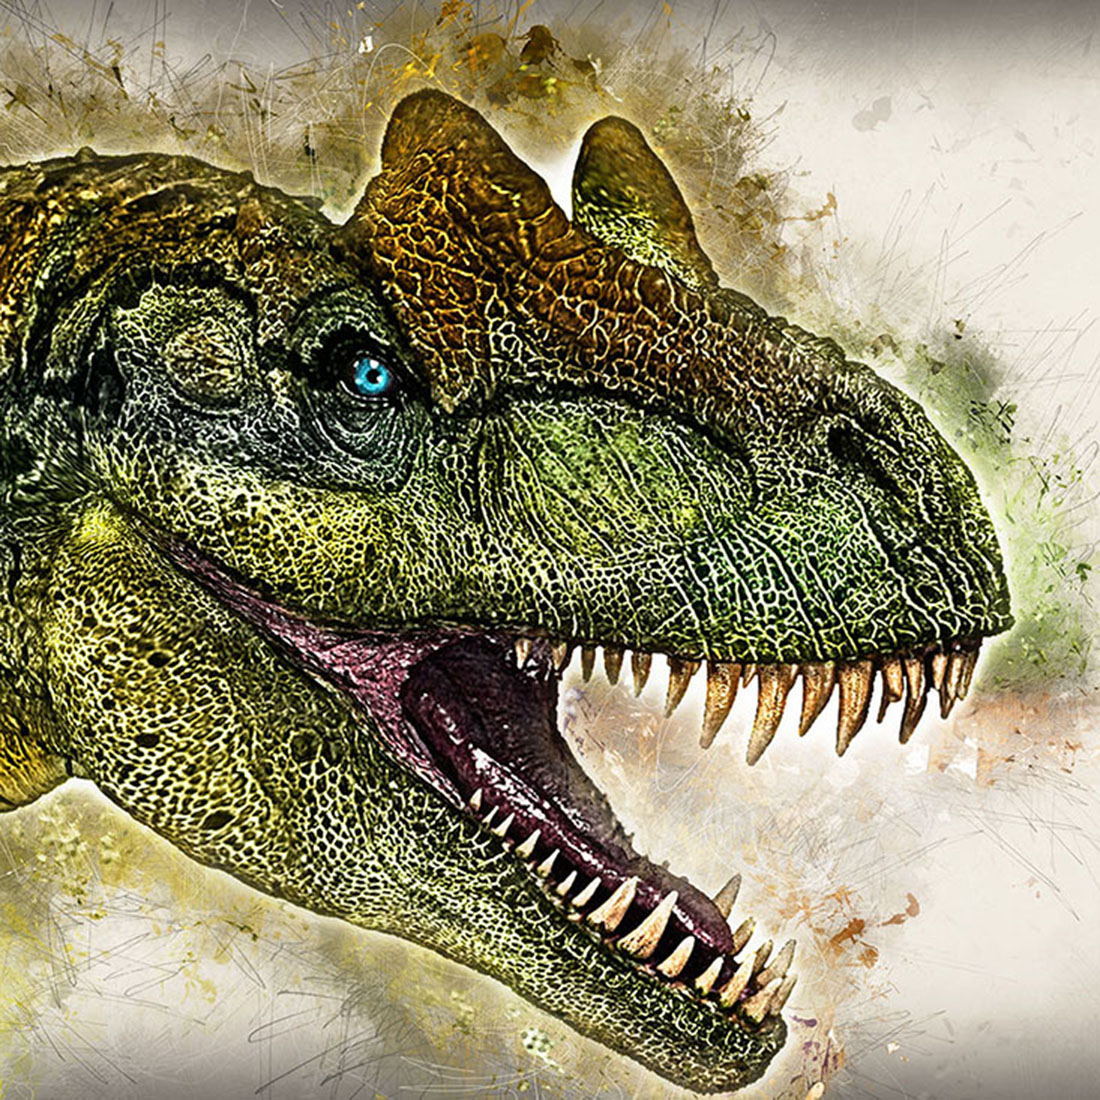 12 Ready-to-Print HQ Graphics of Dinosaur with Rustic Style cover image.